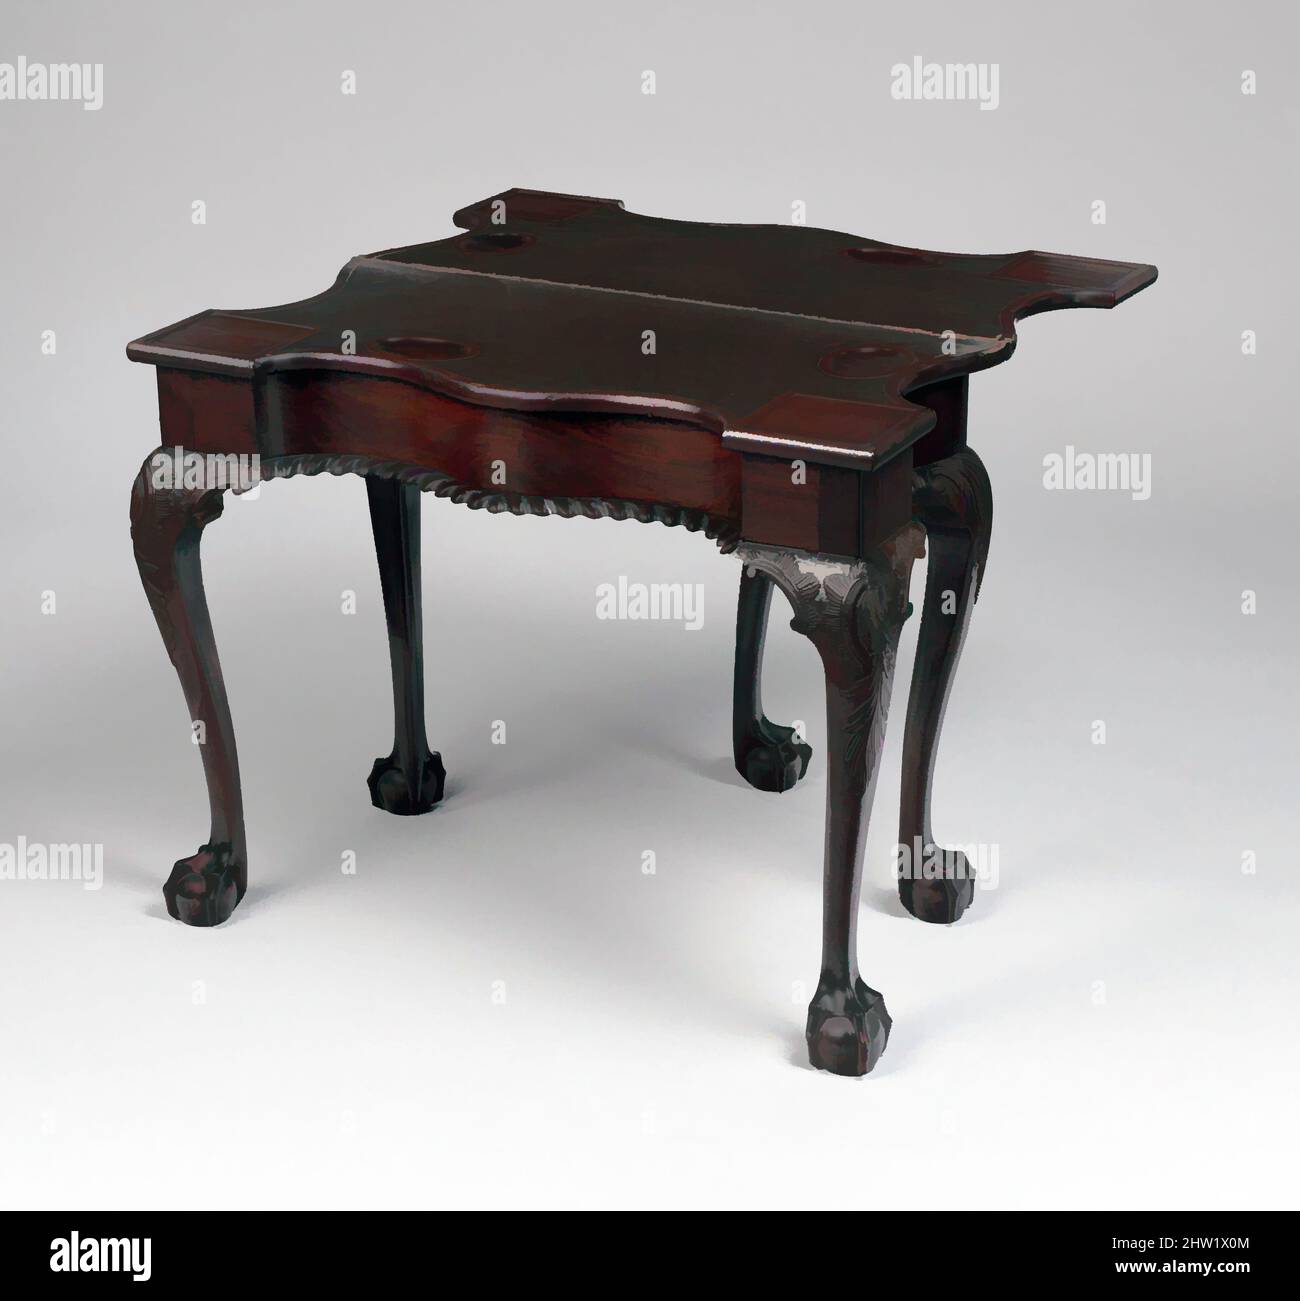 Art inspired by Card Table, 1760–90, Made in New York, New York, United States, American, Mahogany, white oak, tulip poplar, white pine, 27 7/8 x 35 x 17 3/4 in. (70.8 x 88.9 x 45.1 cm), Furniture, The most sophisticated New York Chippendale-style card tables have serpentine sides, Classic works modernized by Artotop with a splash of modernity. Shapes, color and value, eye-catching visual impact on art. Emotions through freedom of artworks in a contemporary way. A timeless message pursuing a wildly creative new direction. Artists turning to the digital medium and creating the Artotop NFT Stock Photo